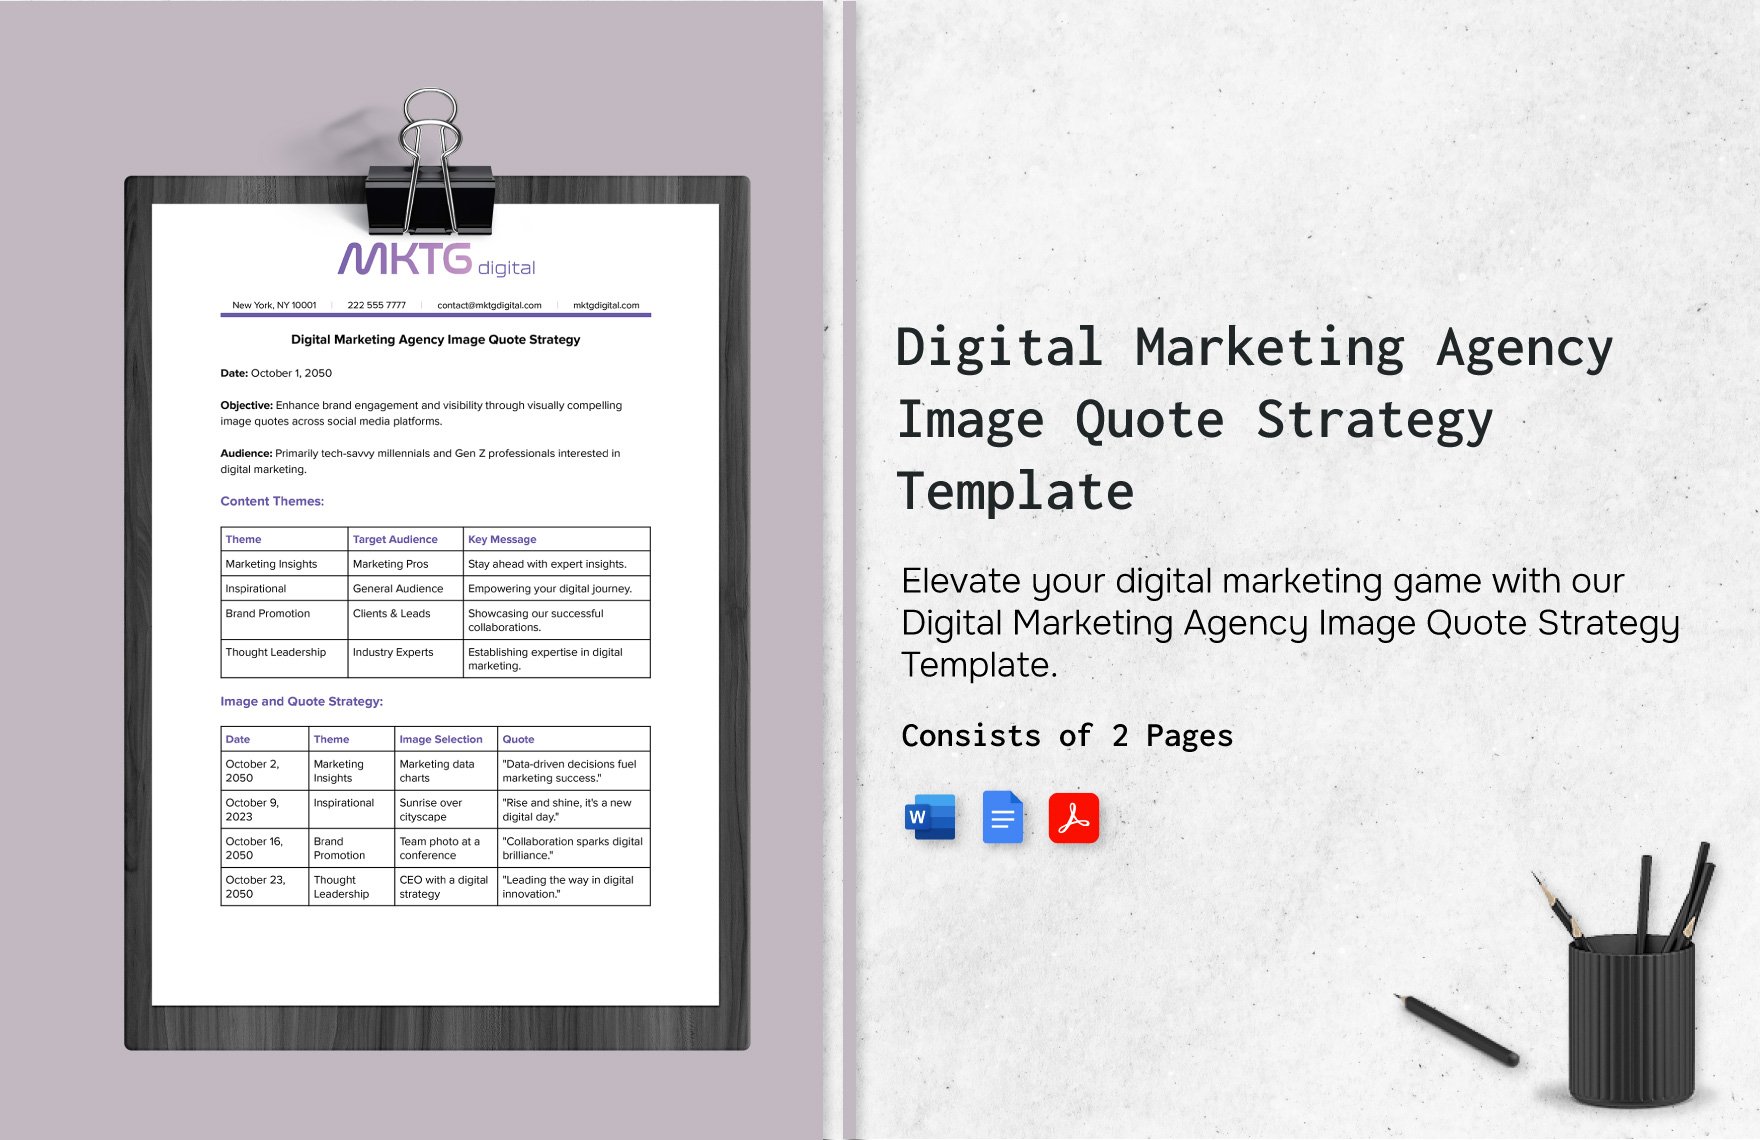 Digital Marketing Agency Image Quote Strategy Template